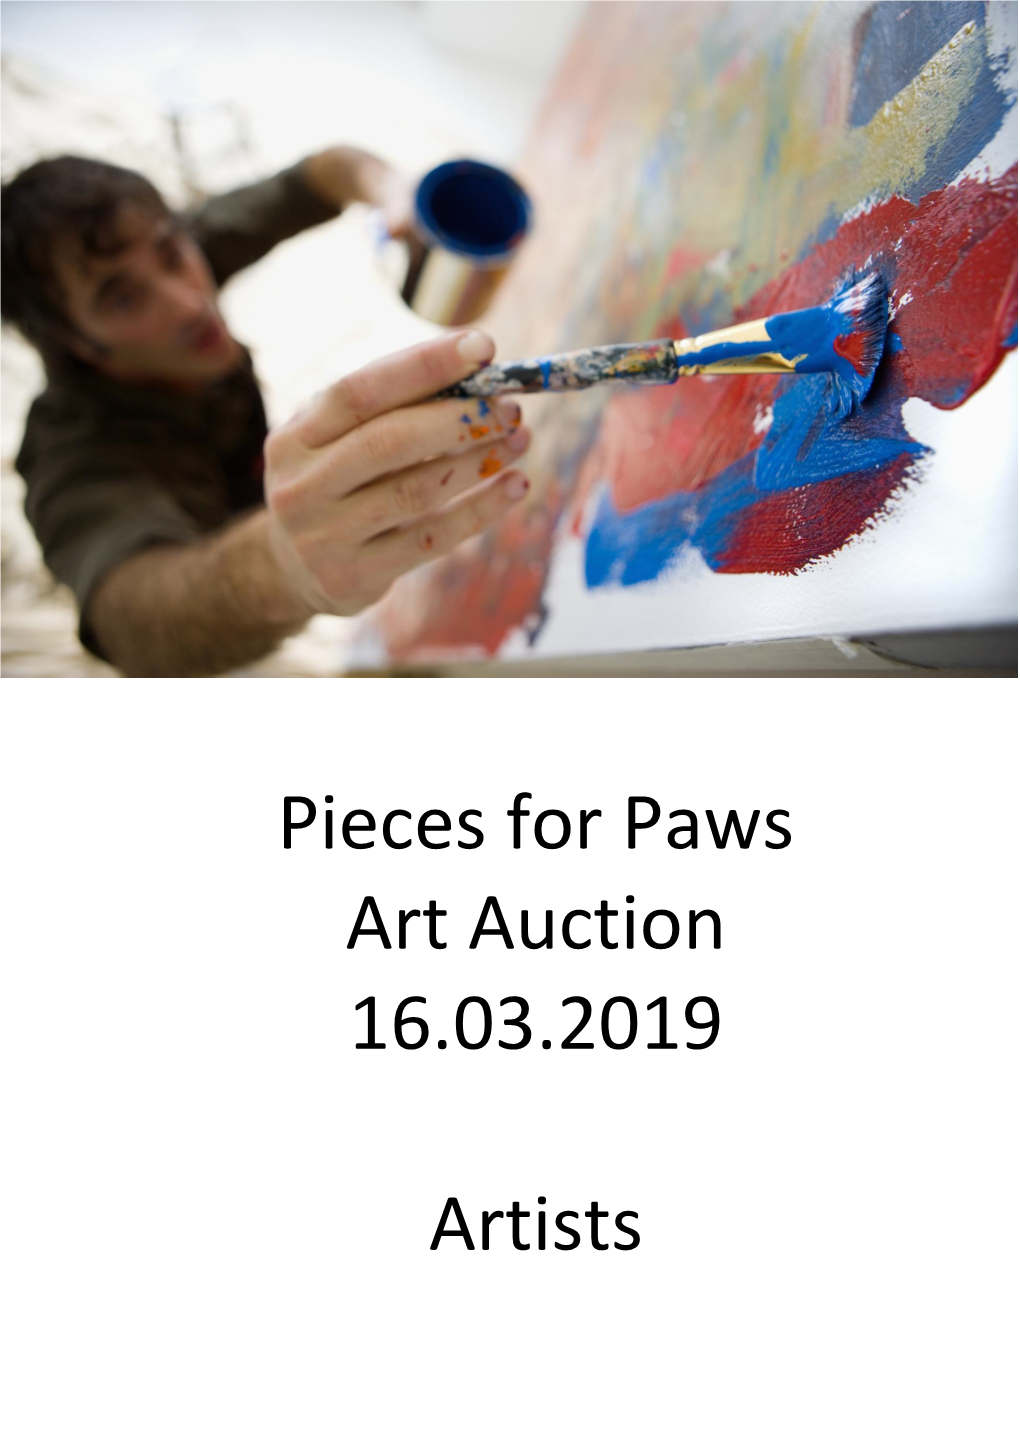 Pieces for Paws Art Auction 16.03.2019 Artists